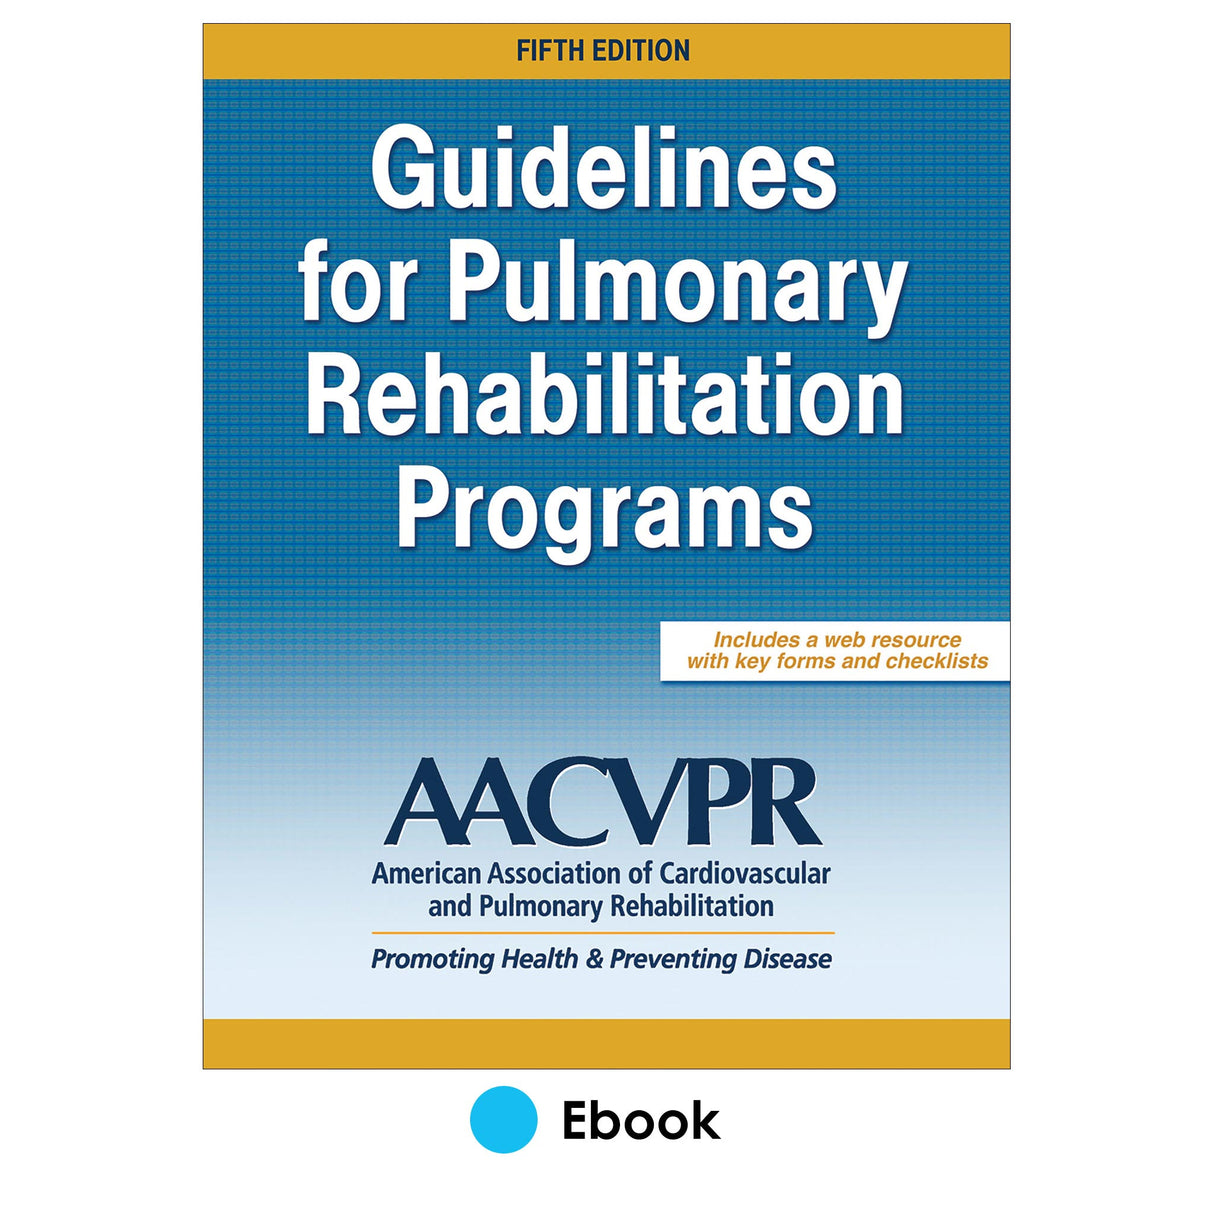 Guidelines for Pulmonary Rehabilitation Programs 5th Edition epub With Web Resource